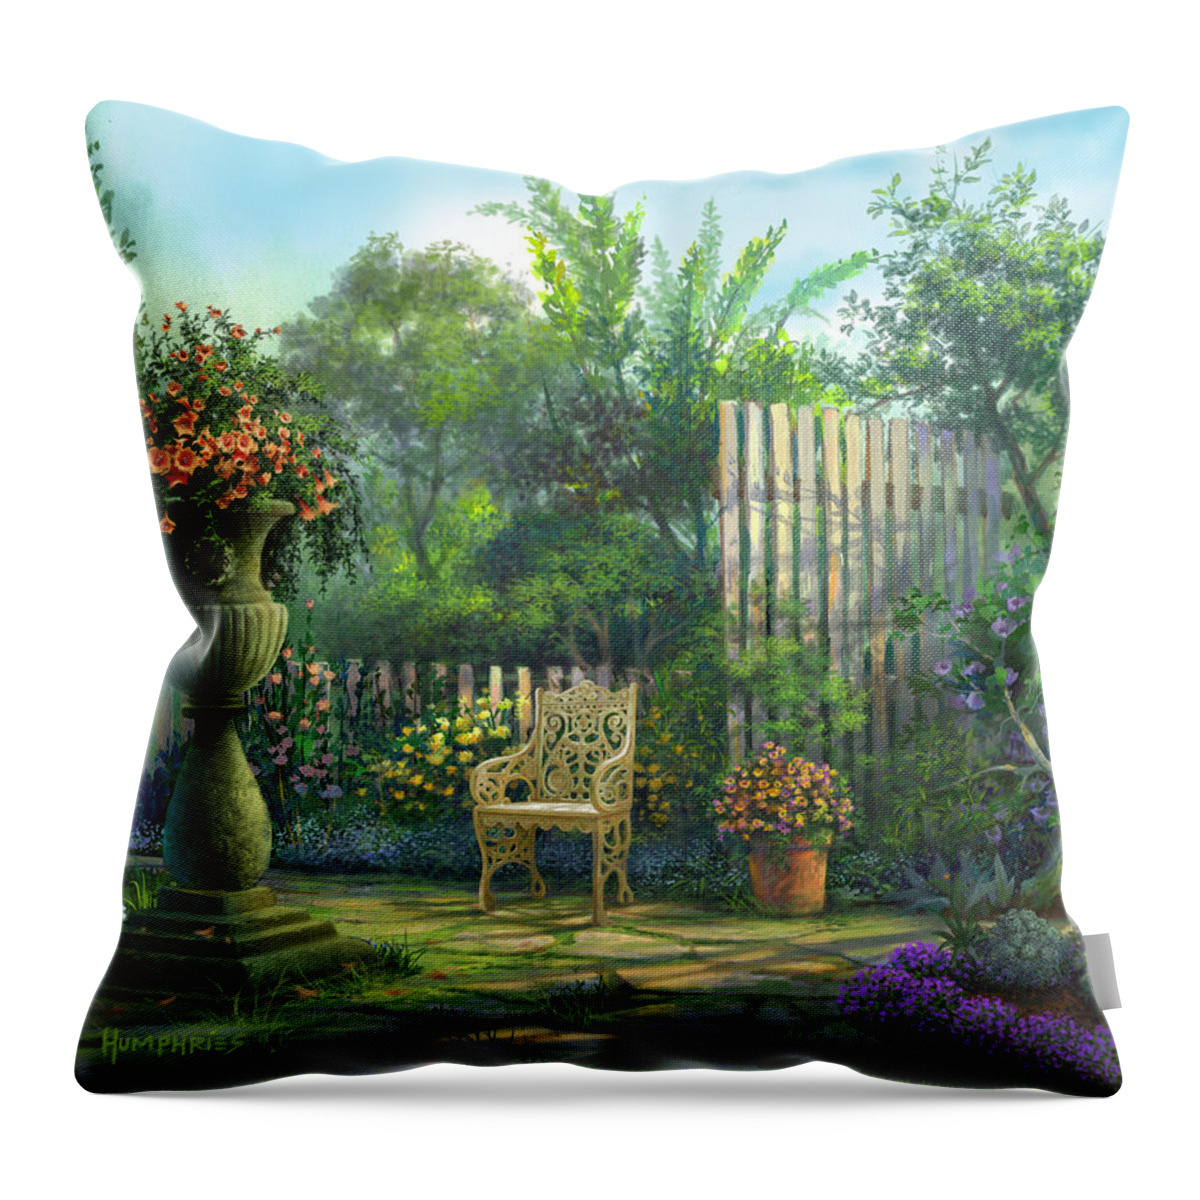 Michael Humphries Throw Pillow featuring the painting Country Contrasts by Michael Humphries